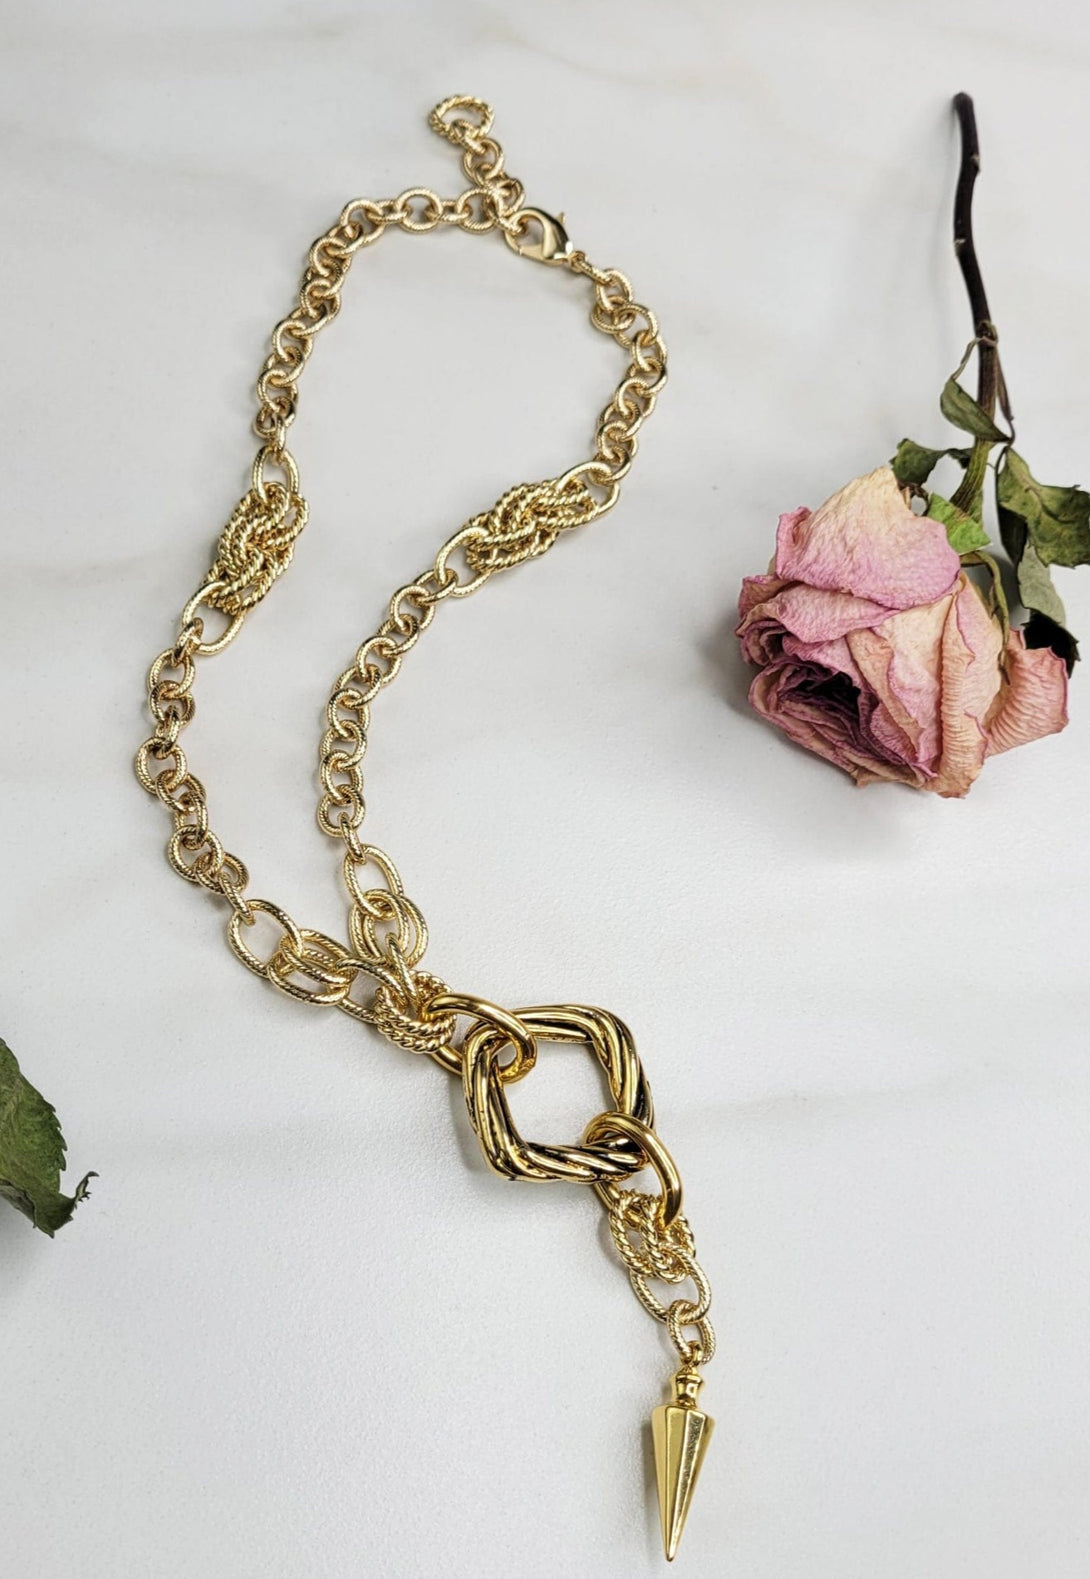 Handmade Necklace with Gold Plated Chain and Vintage Pendant and Charm